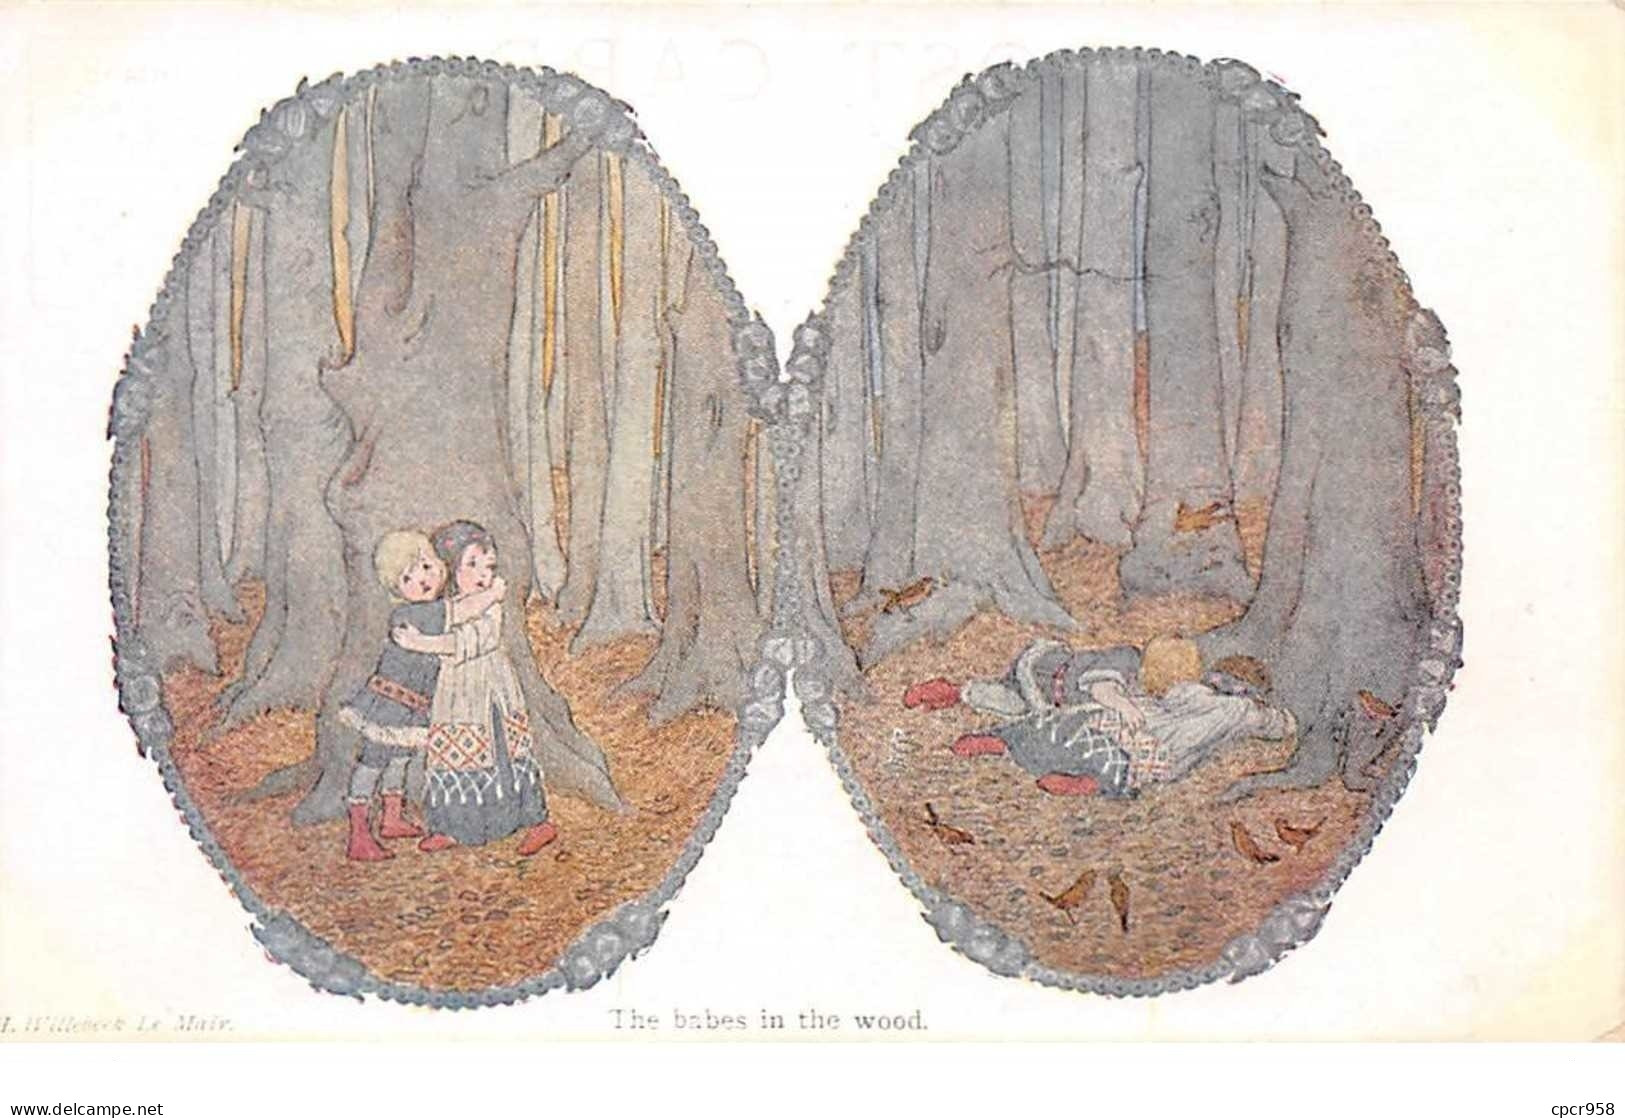 Illustrateur - N°61593 - H. Willebeek Le Mair - Small Rhymes For Small People - The Babes In The Wood - Le Mair